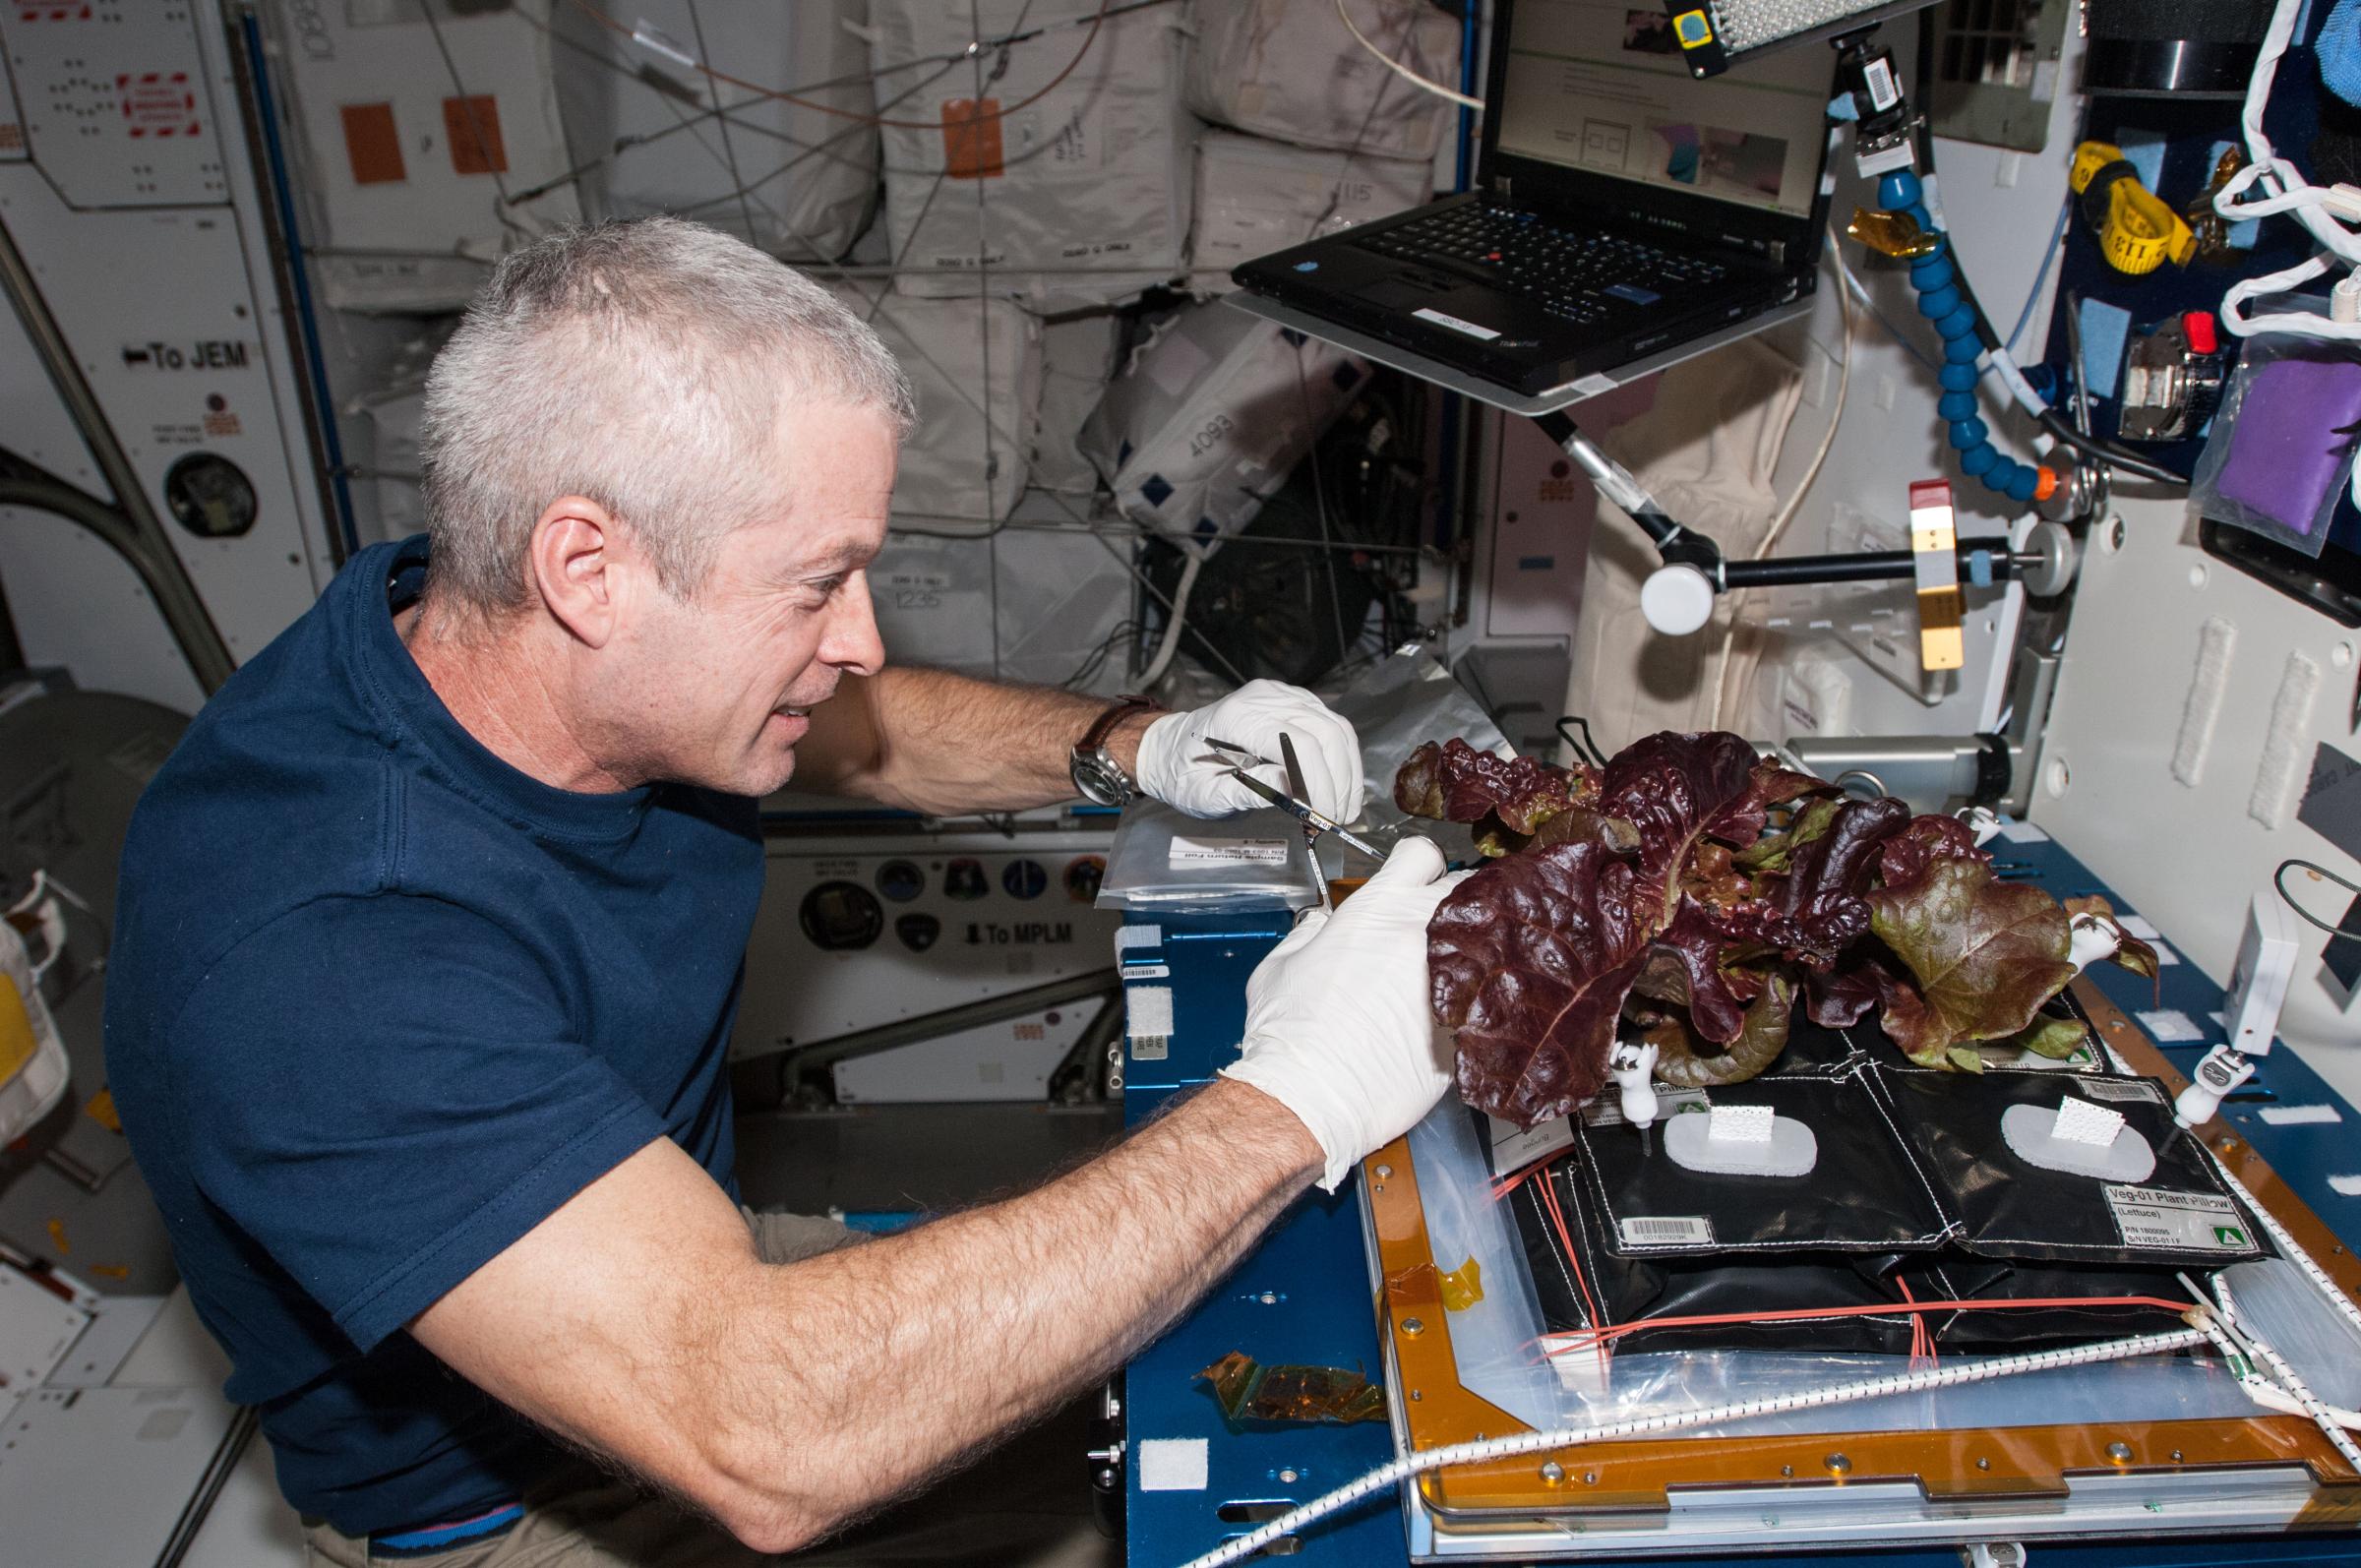 In the International Space Station's Harmony node, NASA astronaut Steve Swanson harvests a crop of red romaine lettuce plants that were grown from seed inside the station's Veggie facility,